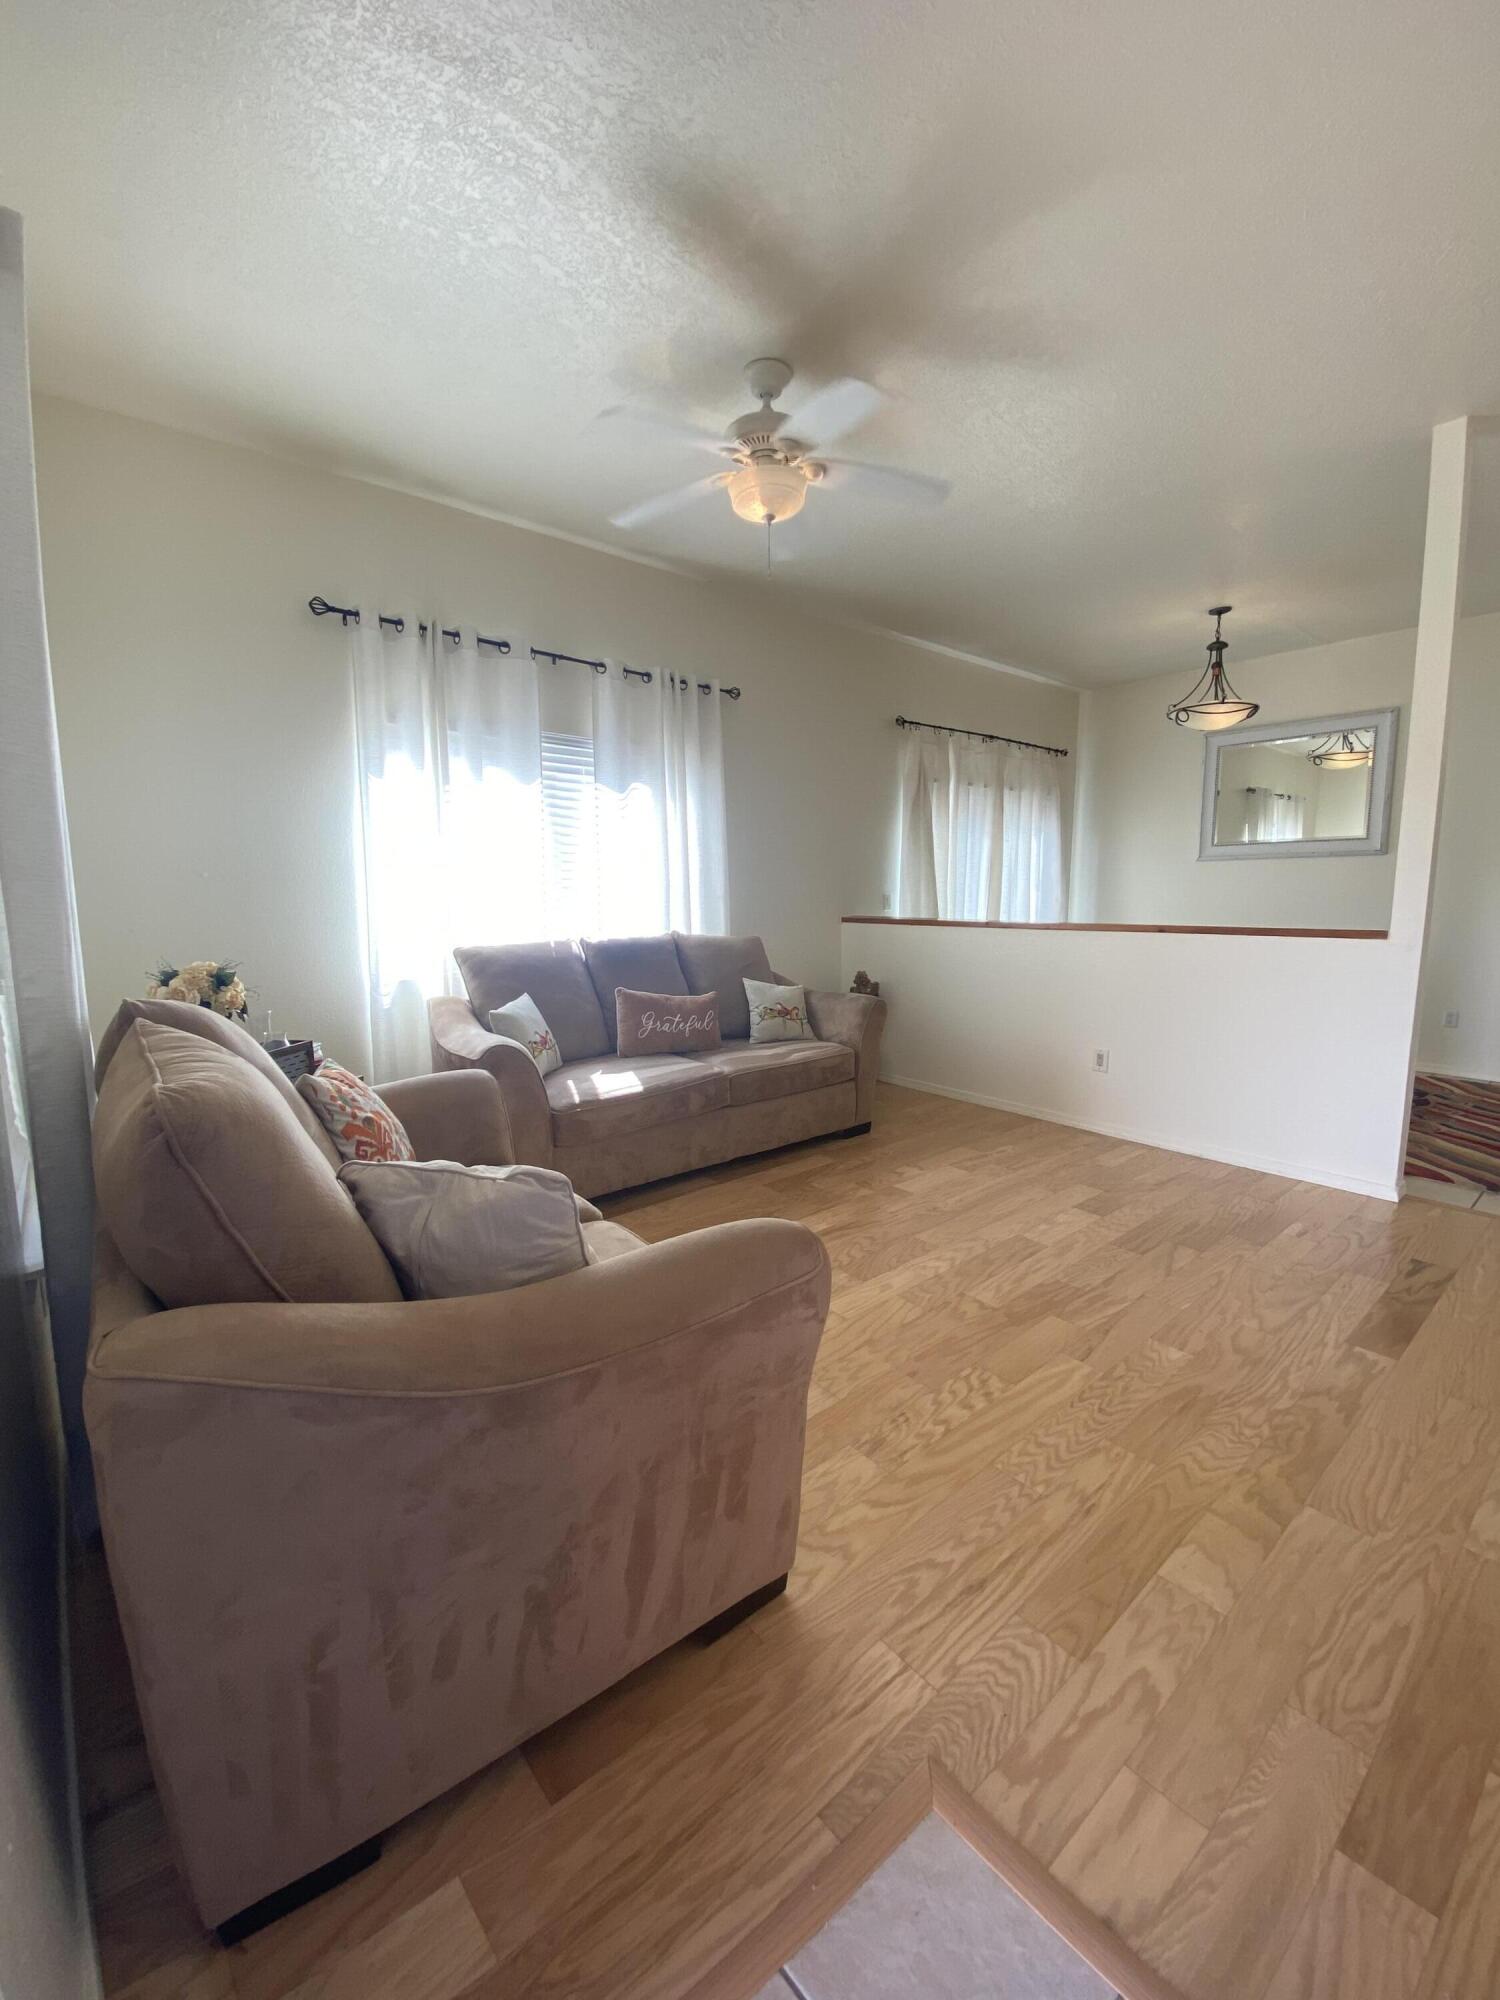 7021 Cleghorn Road NW, Albuquerque, New Mexico 87120, 3 Bedrooms Bedrooms, ,2 BathroomsBathrooms,Residential,For Sale,7021 Cleghorn Road NW,1059839